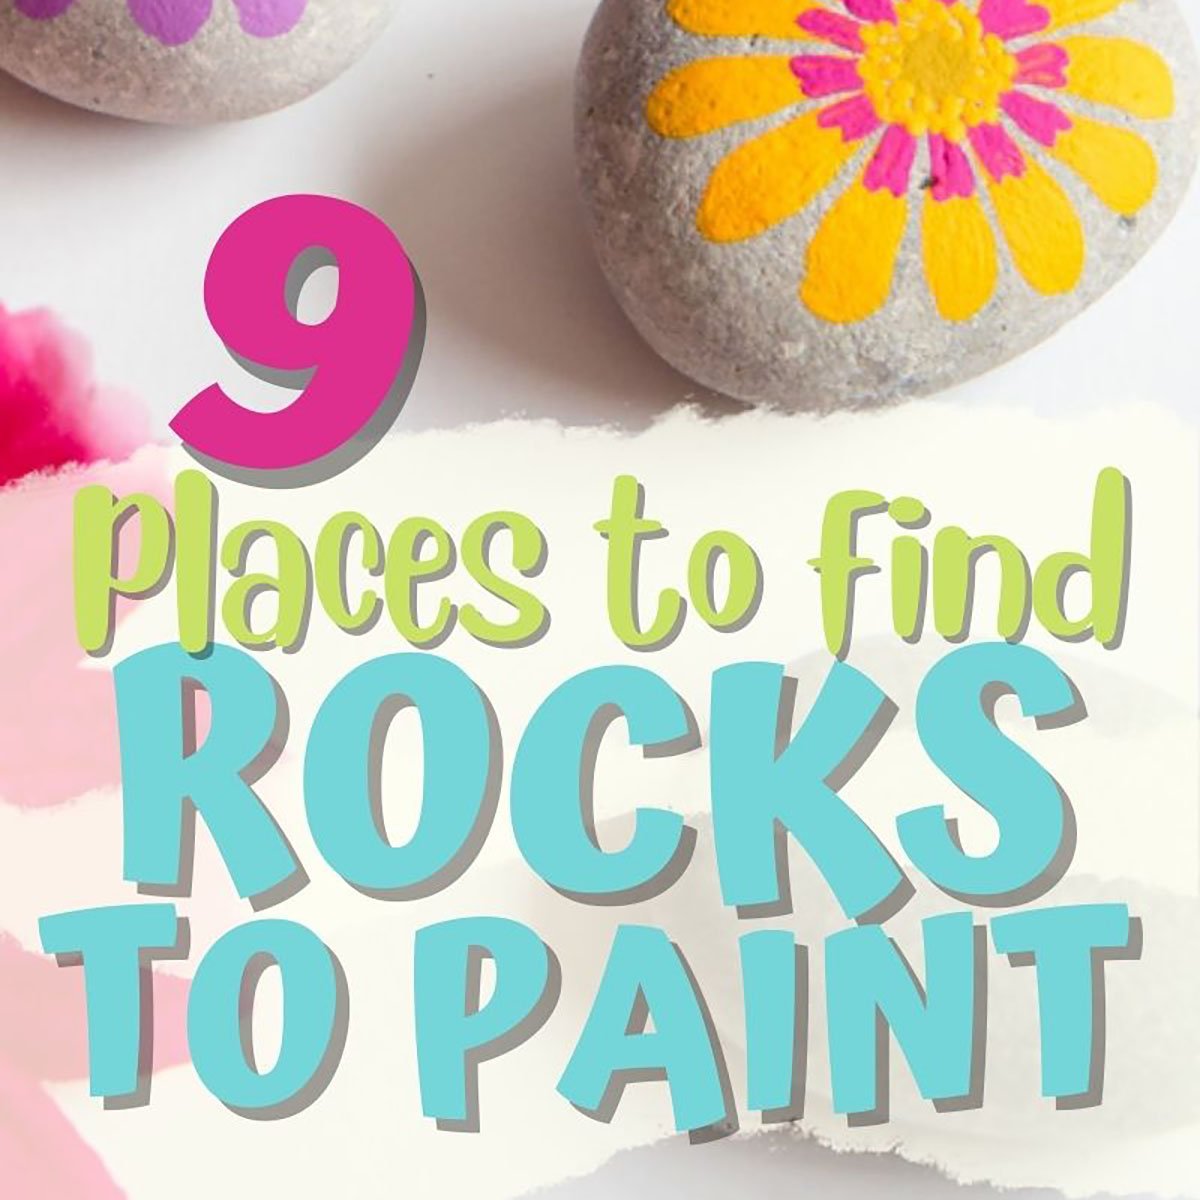 9 Best Places to Find Rocks to Paint – Sustain My Craft Habit